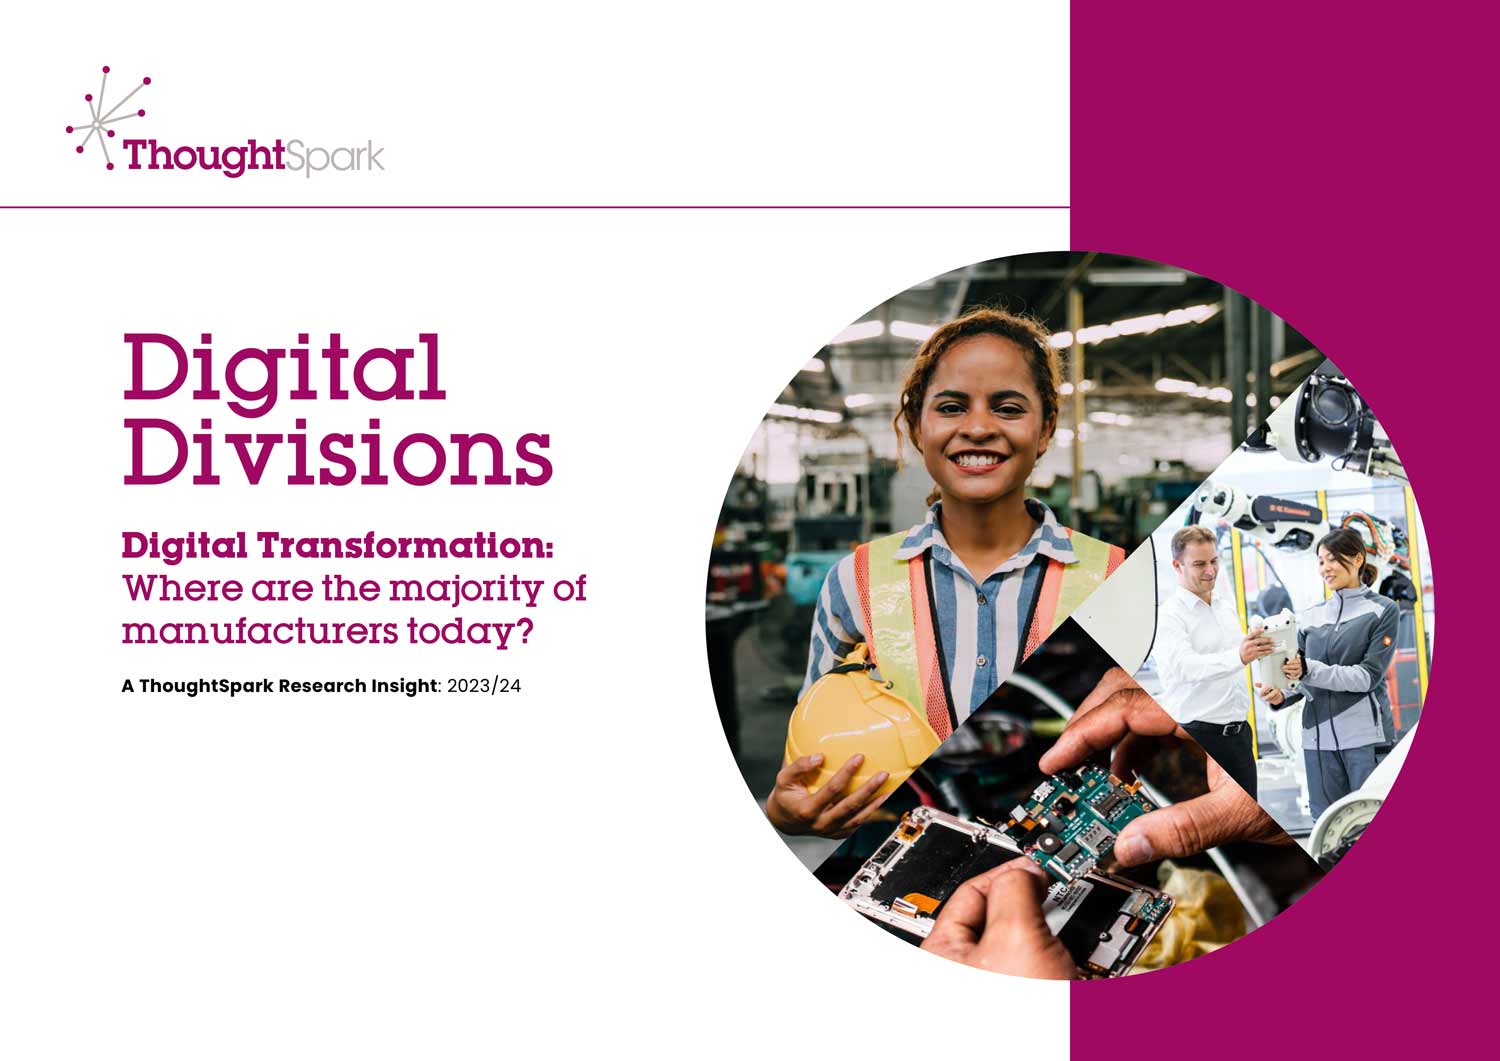 Digital Divisions | Digital Transformation: Where are the majority of manufacturers today?